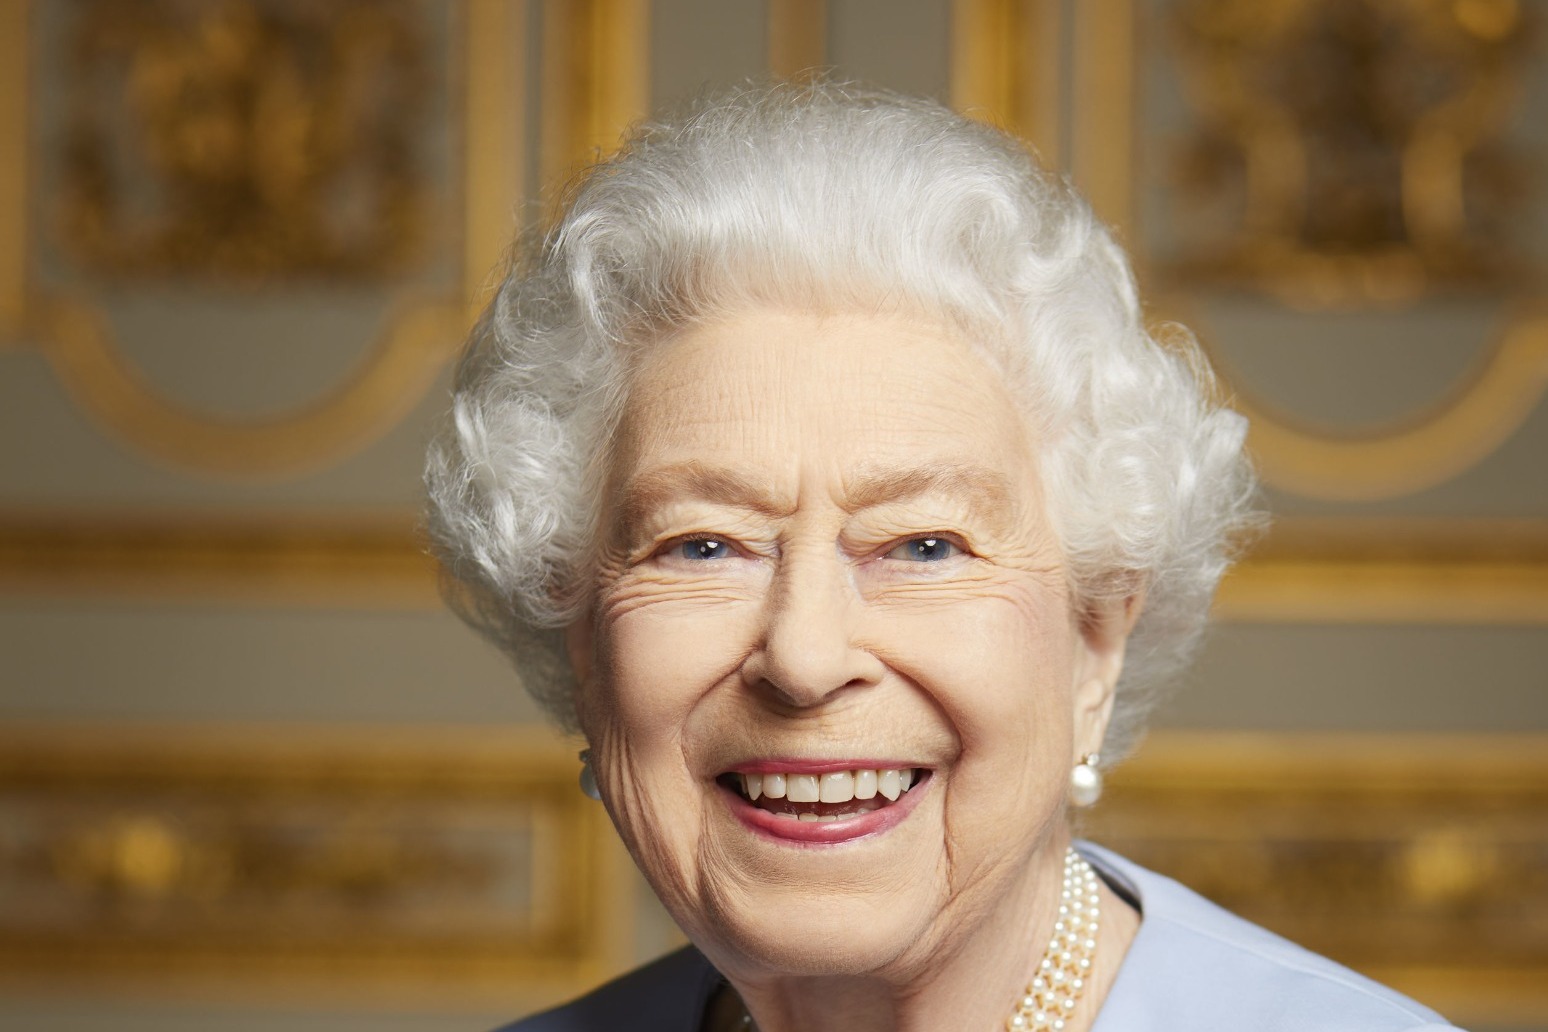 Unseen portrait of joyous Queen released by Palace ahead of final farewell 